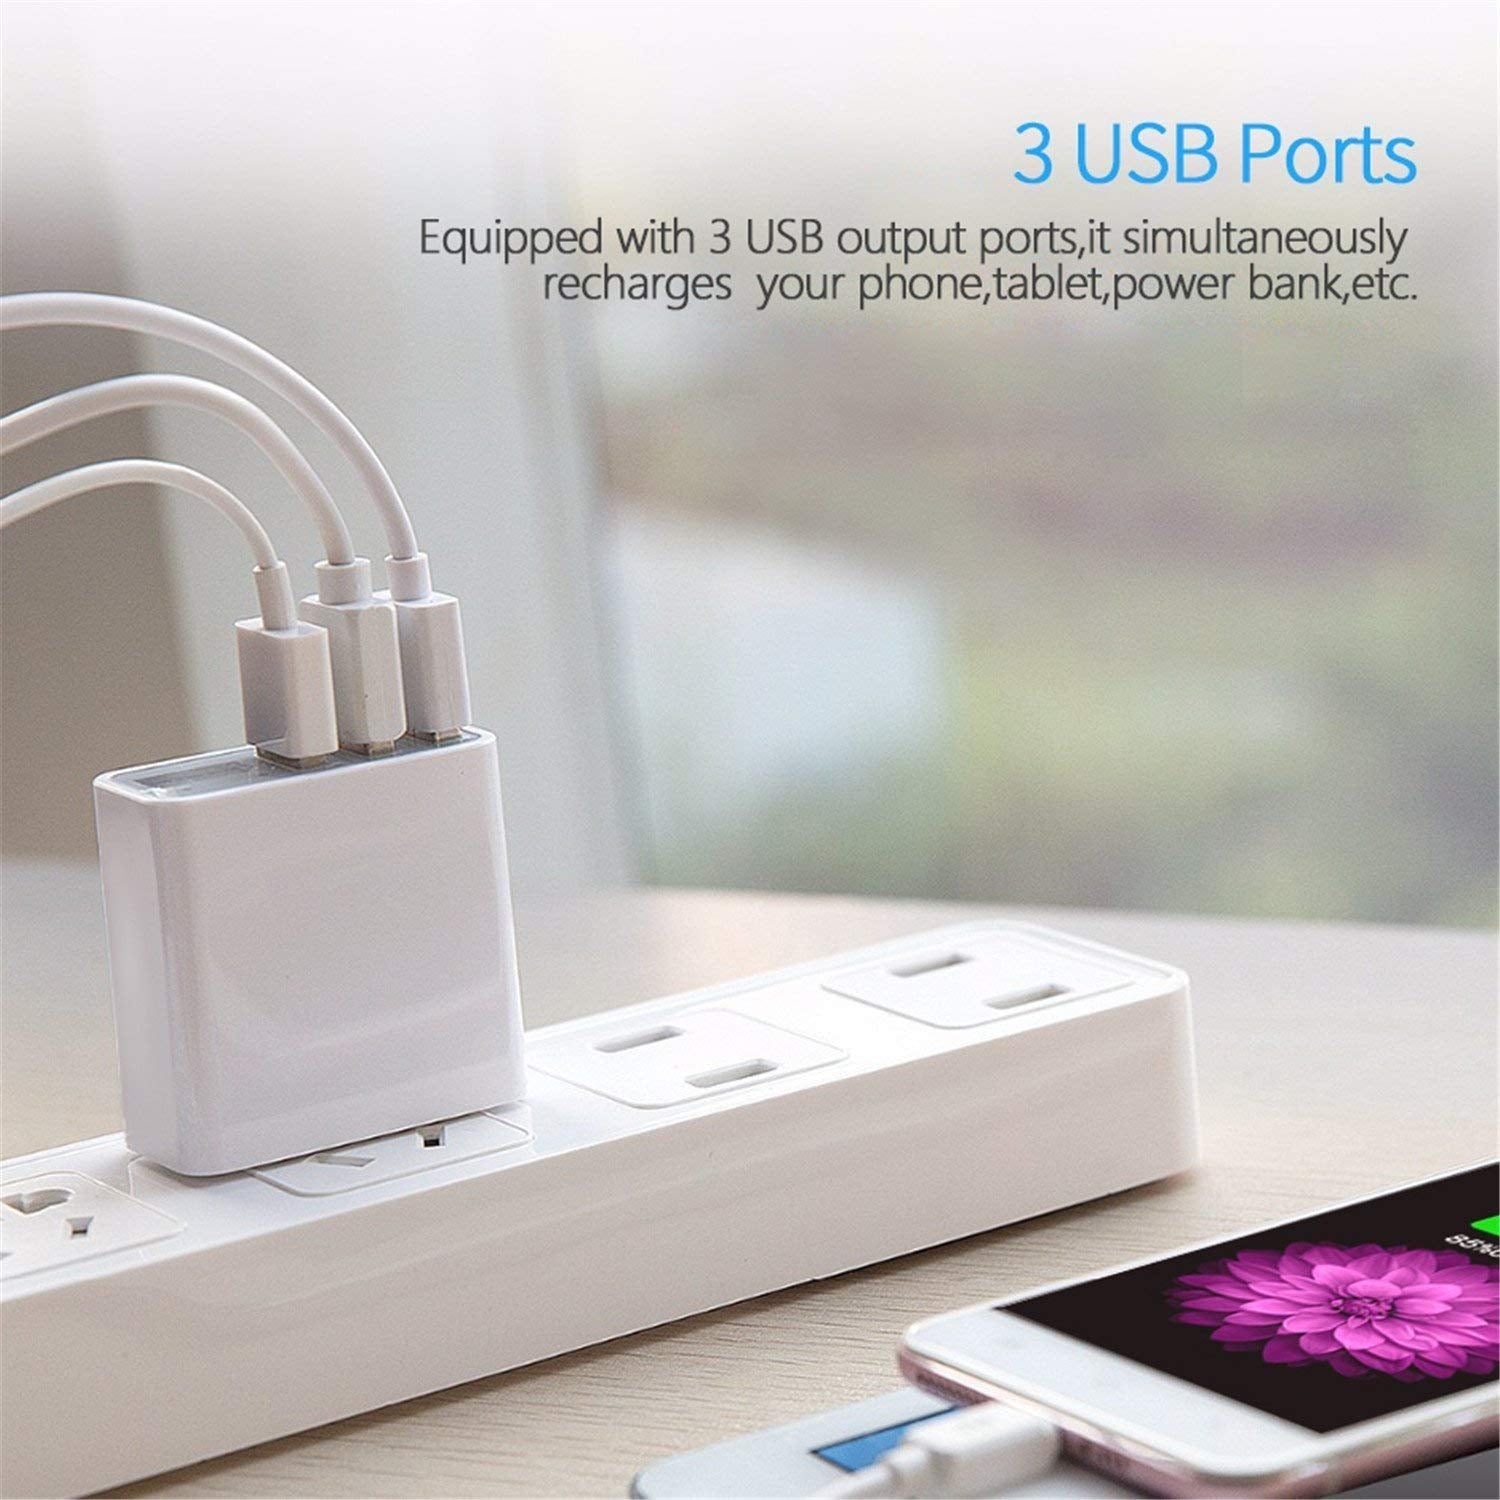 C0026 Rapid Wall Charger LED Display 5V/3A 3-Port Wall Charger CHOETECH